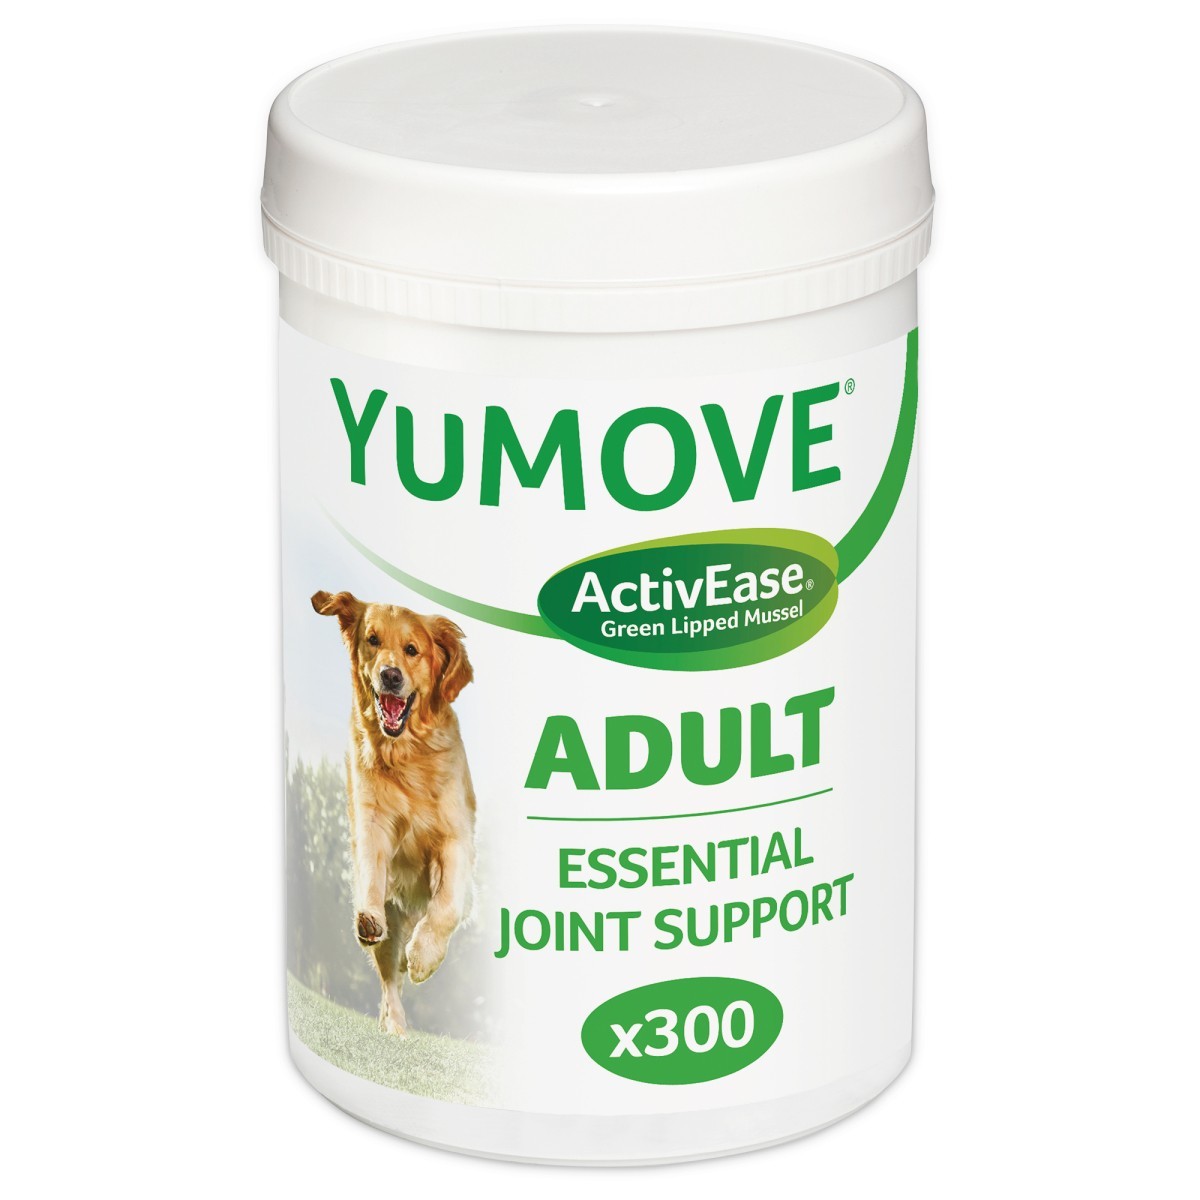 yumove tablets for older dogs